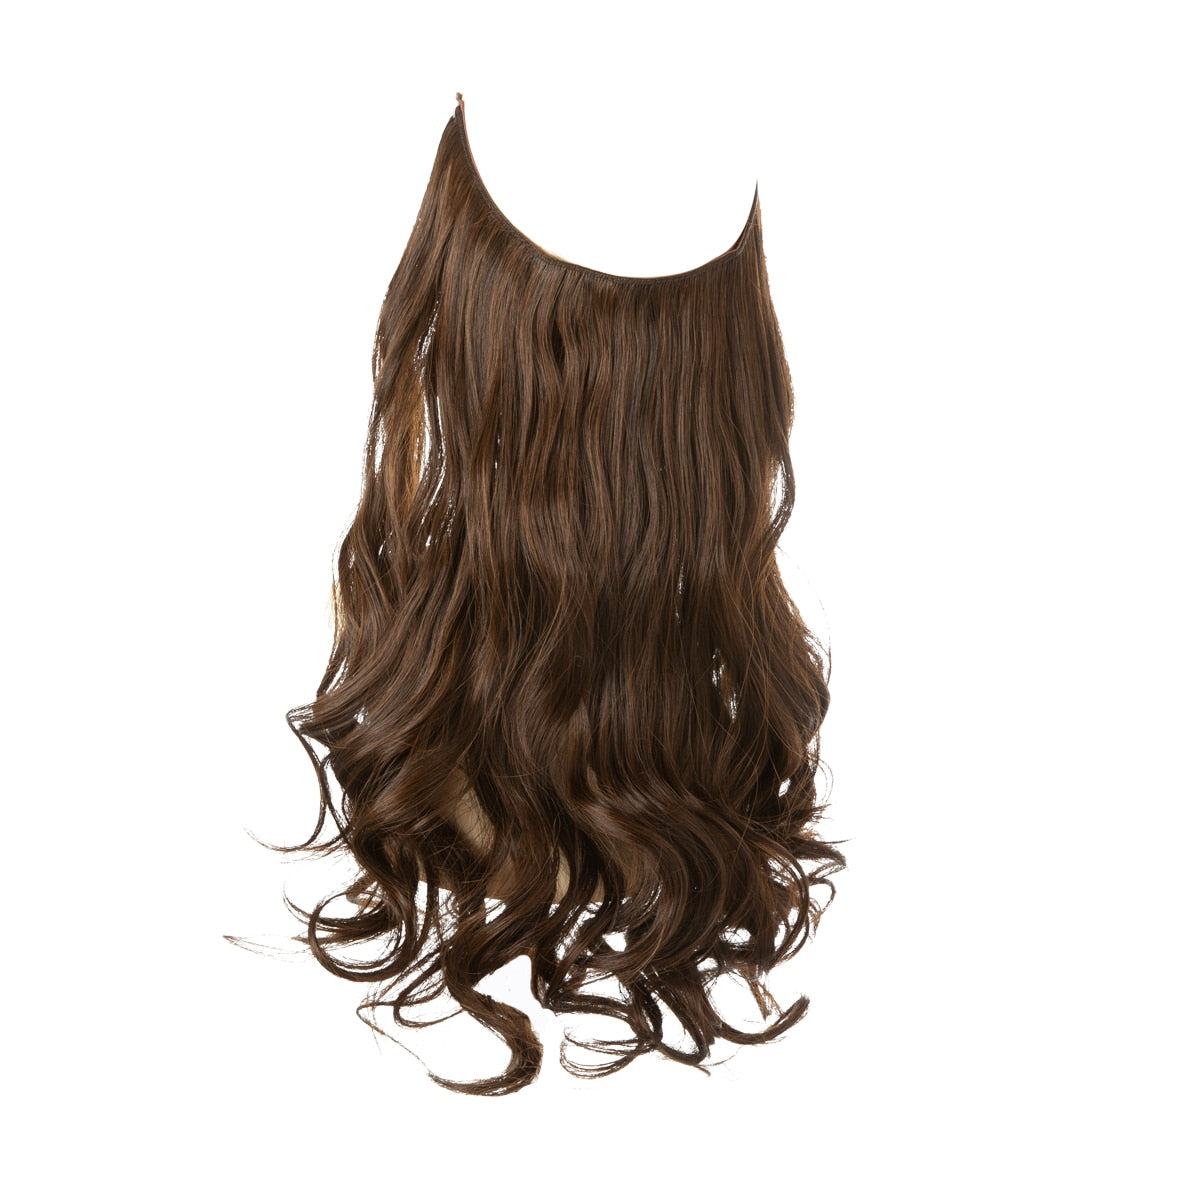 TEEK - Invisible Synth No Clip No Comb Wave Hair Extensions | Dark Varieties HAIR theteekdotcom Ginger Brown 14inches 